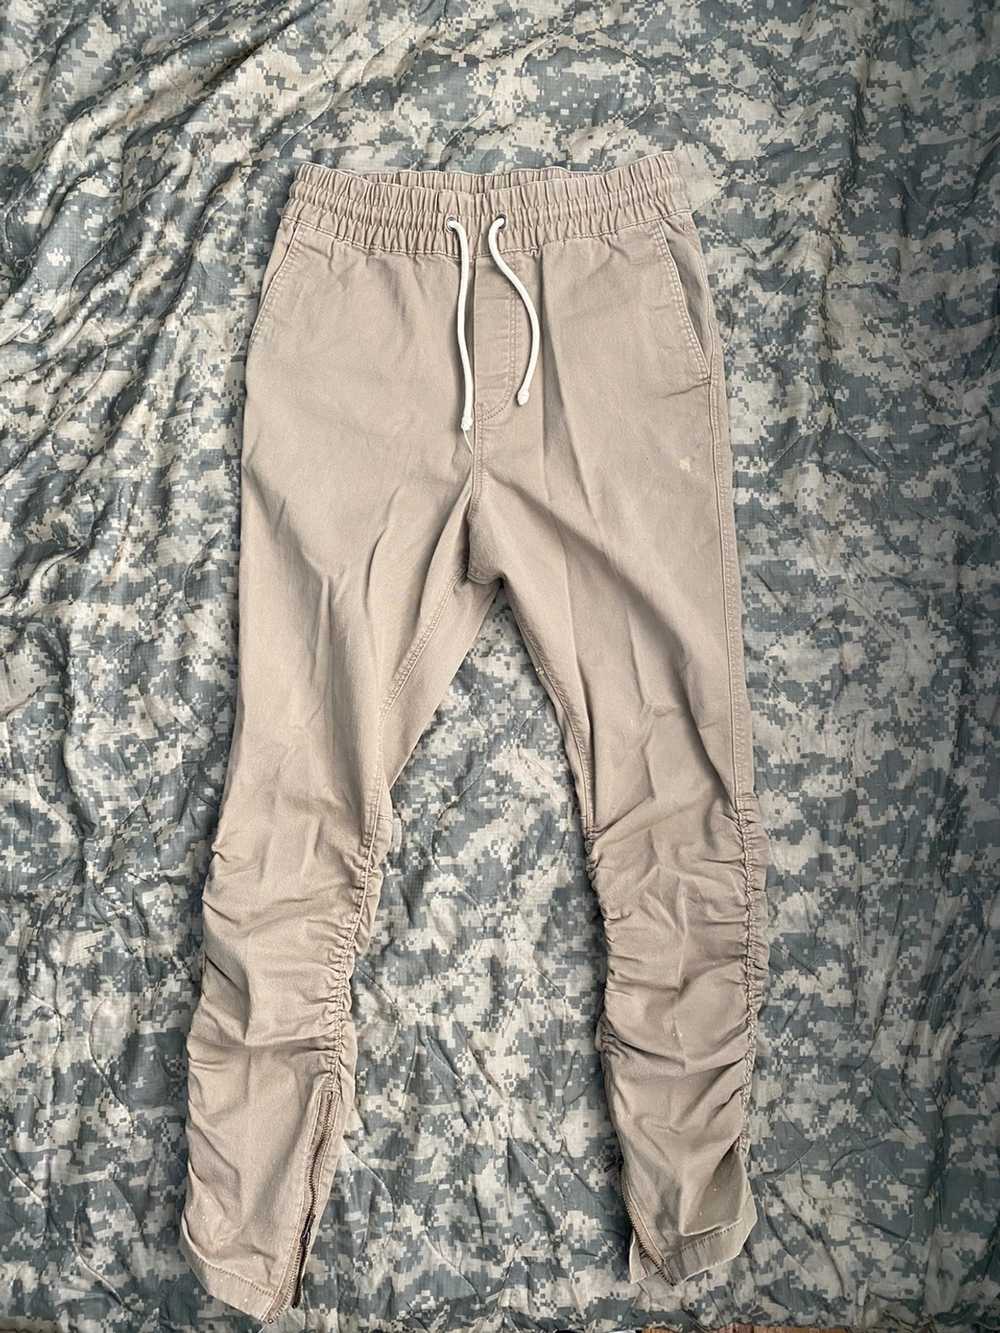 https://img.gem.app/317409096/1f/1658185580/divided-divided-joggers-these-are-zipper-pants-not.jpg